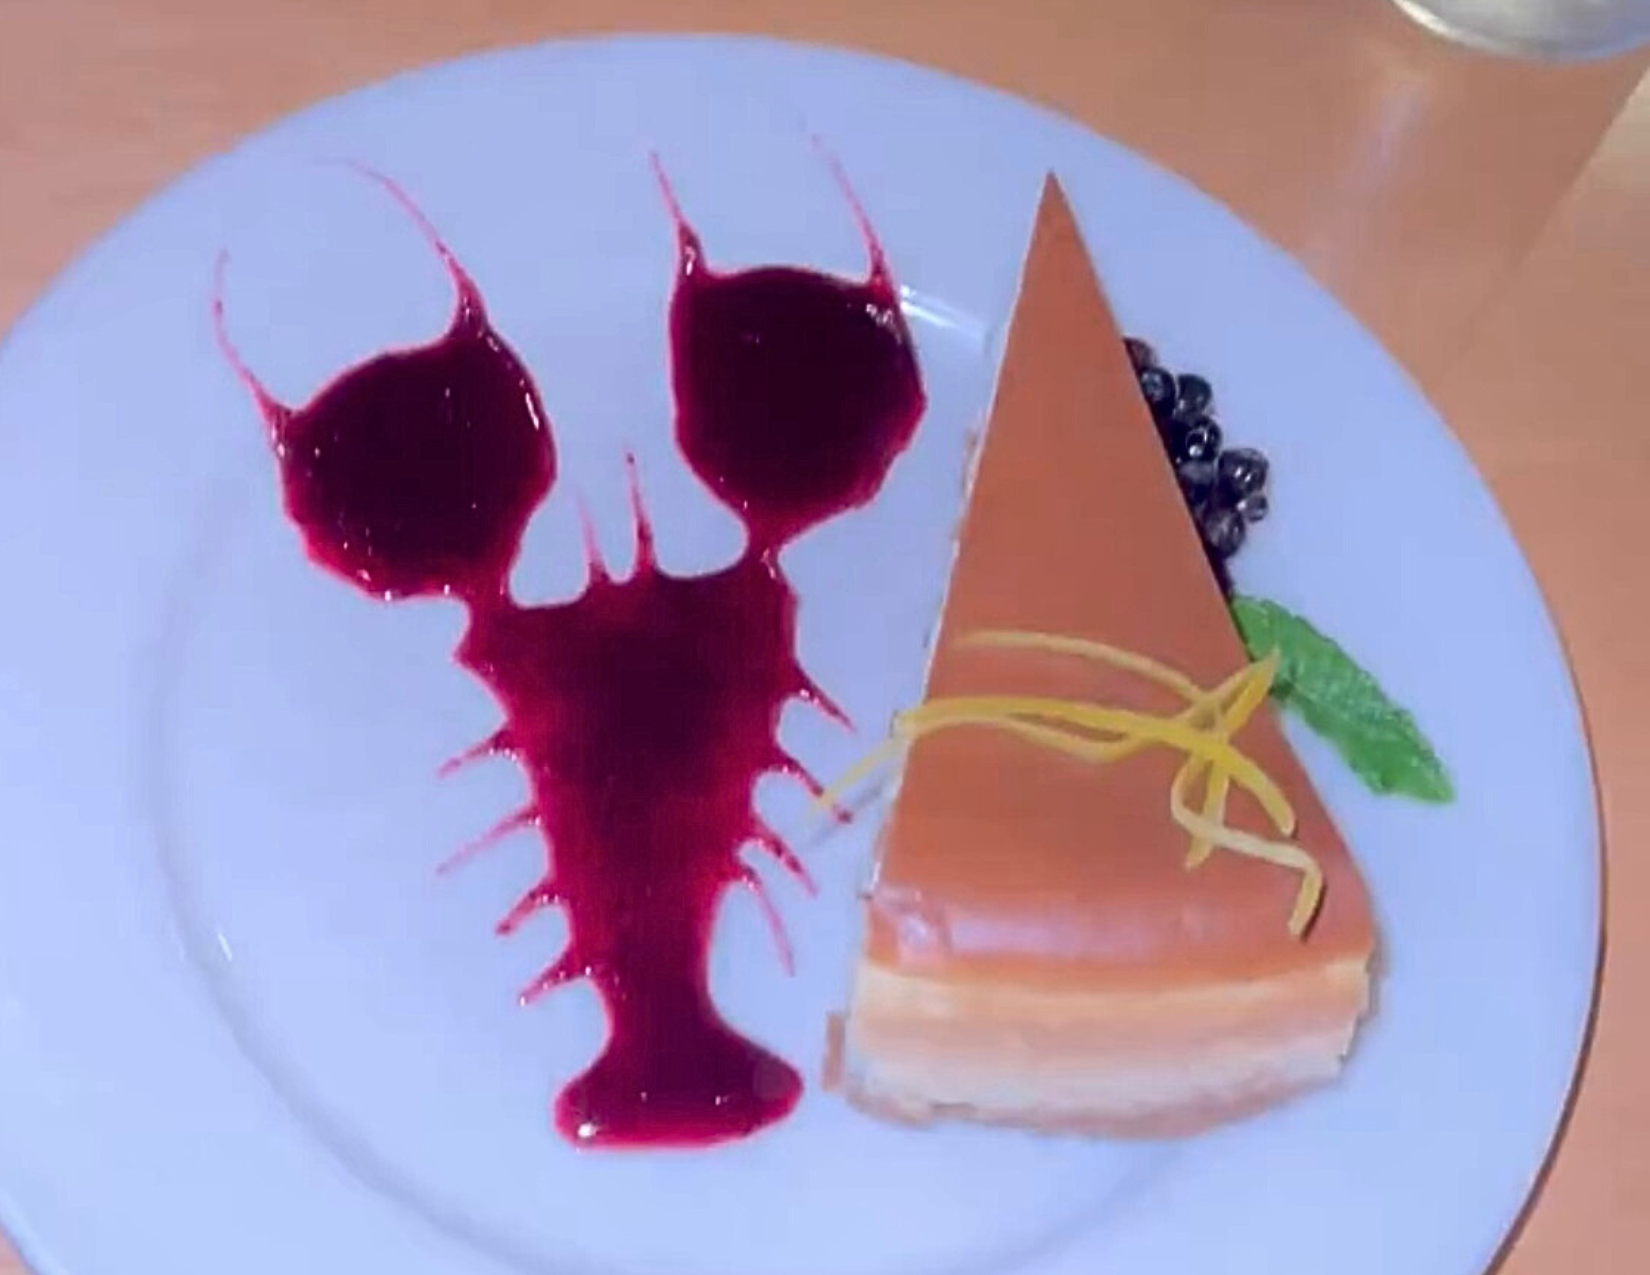 A slice cheesecake topped with lemon zest, sitting next to a lobster made out of blueberry juice